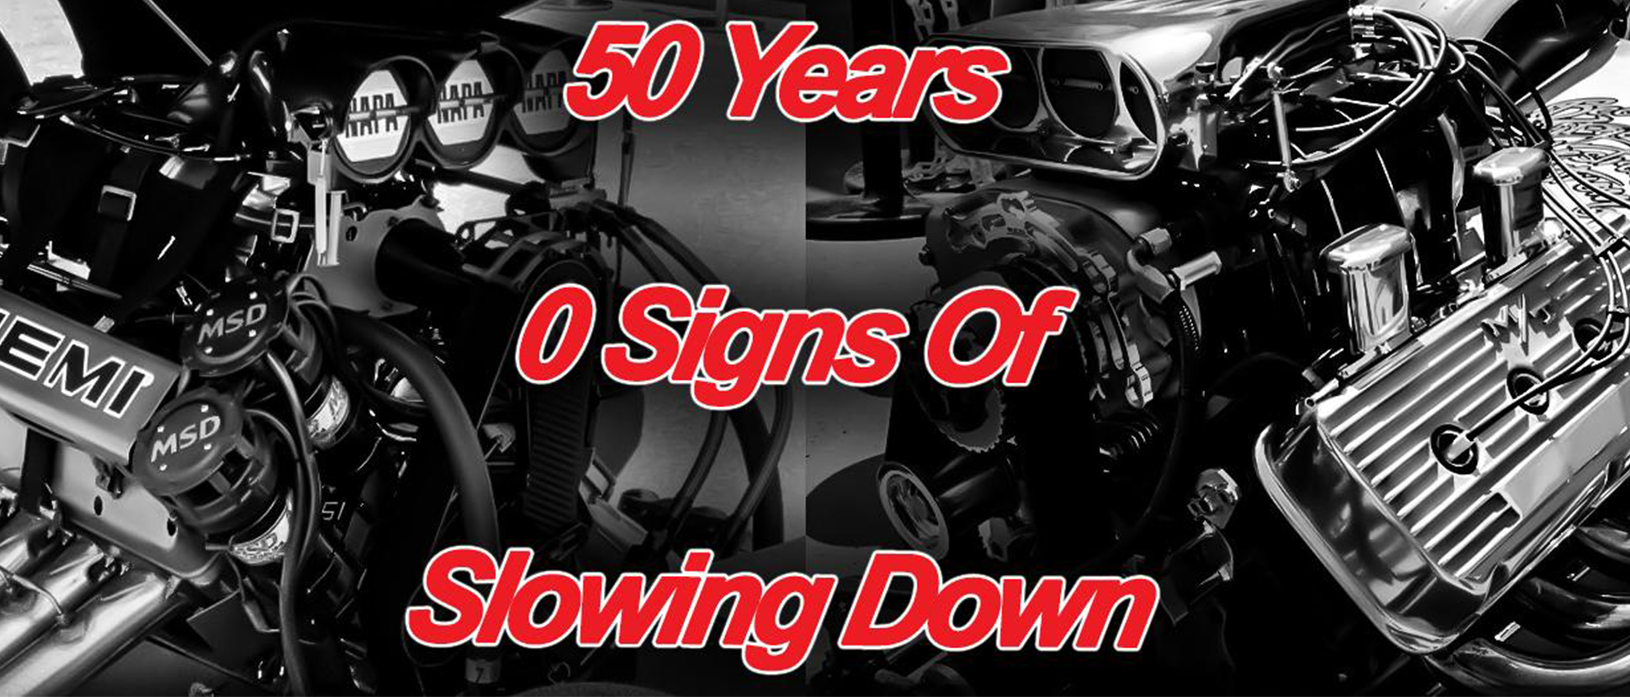 50 Years And 0 Signs Of Slowing Down